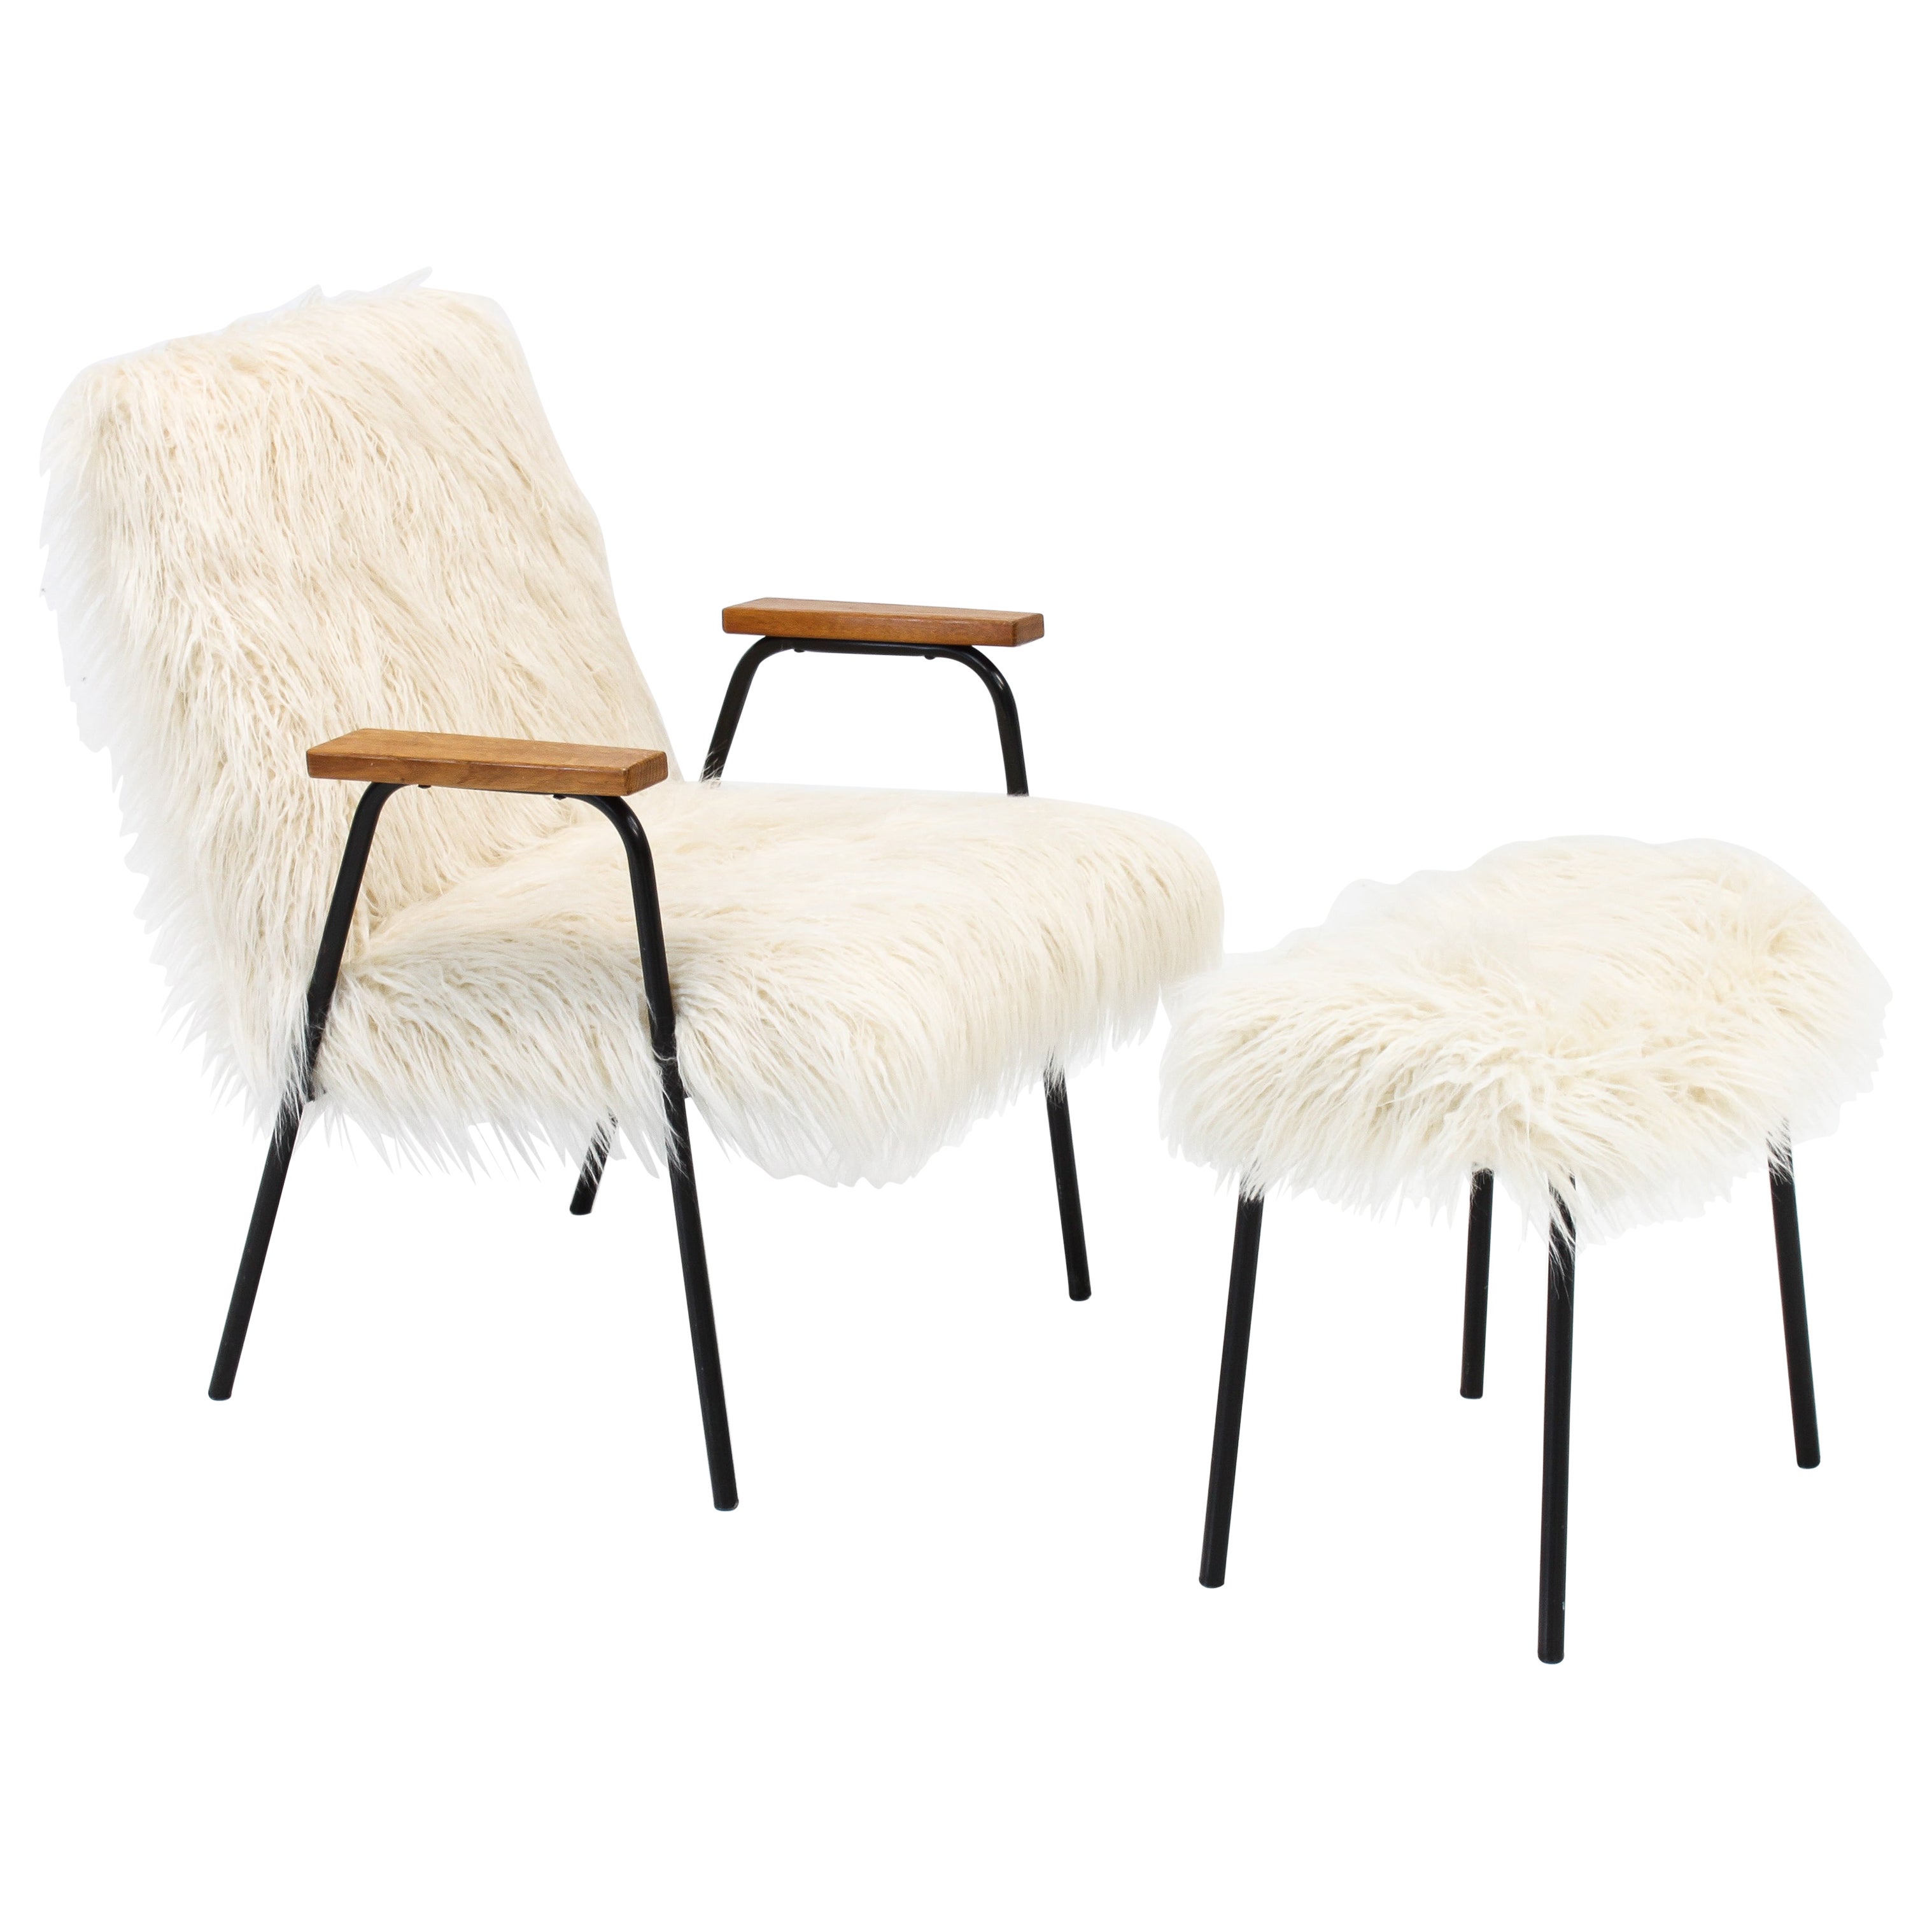 "Robert" Armchair Set Designed by Pierre Guariche Upholstered in Pierre Frey